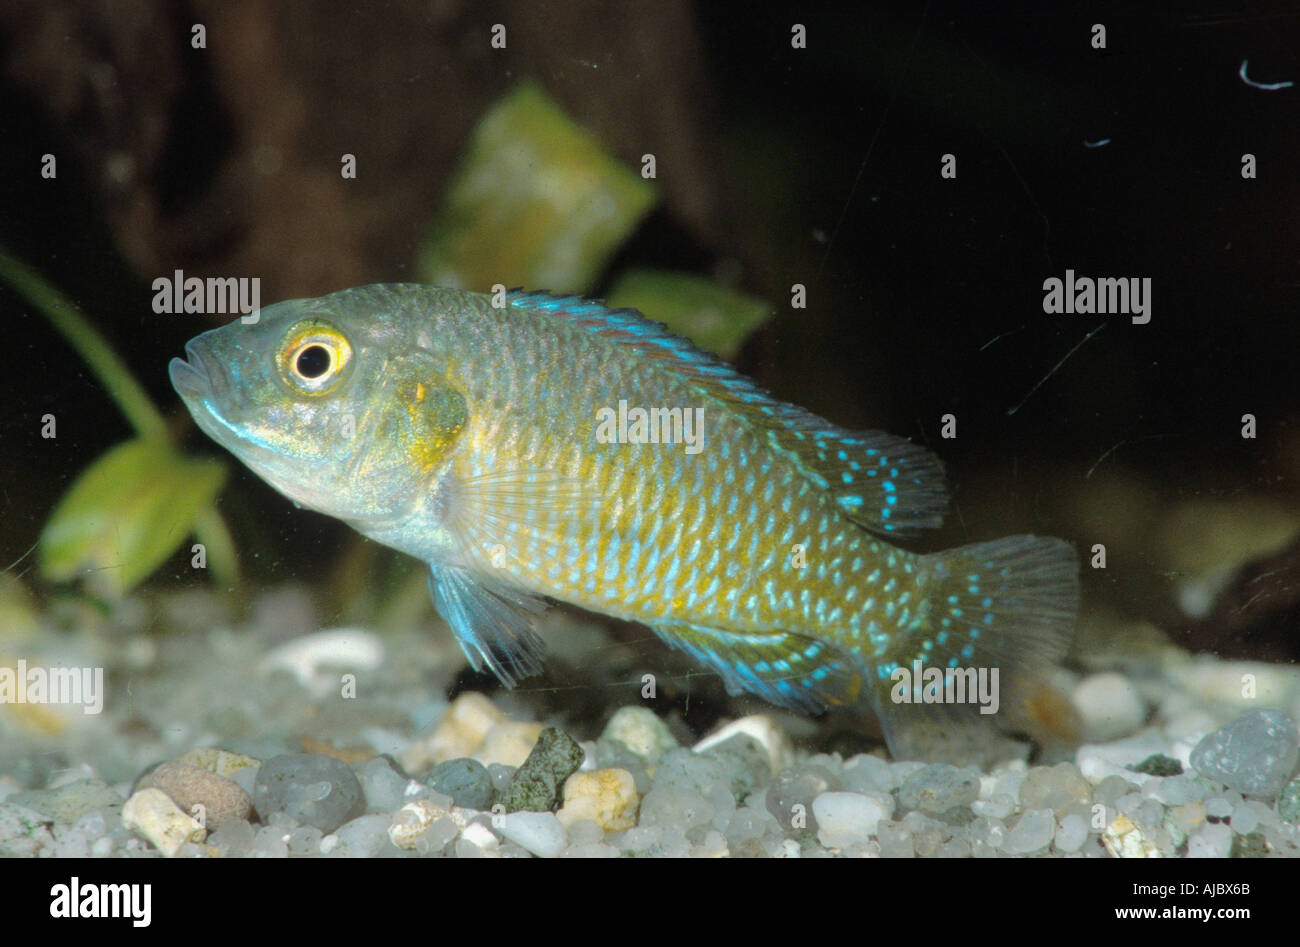 dwarf Egyptian mouthbrooder (Pseudocrenilabrus multicolor), male Stock Photo